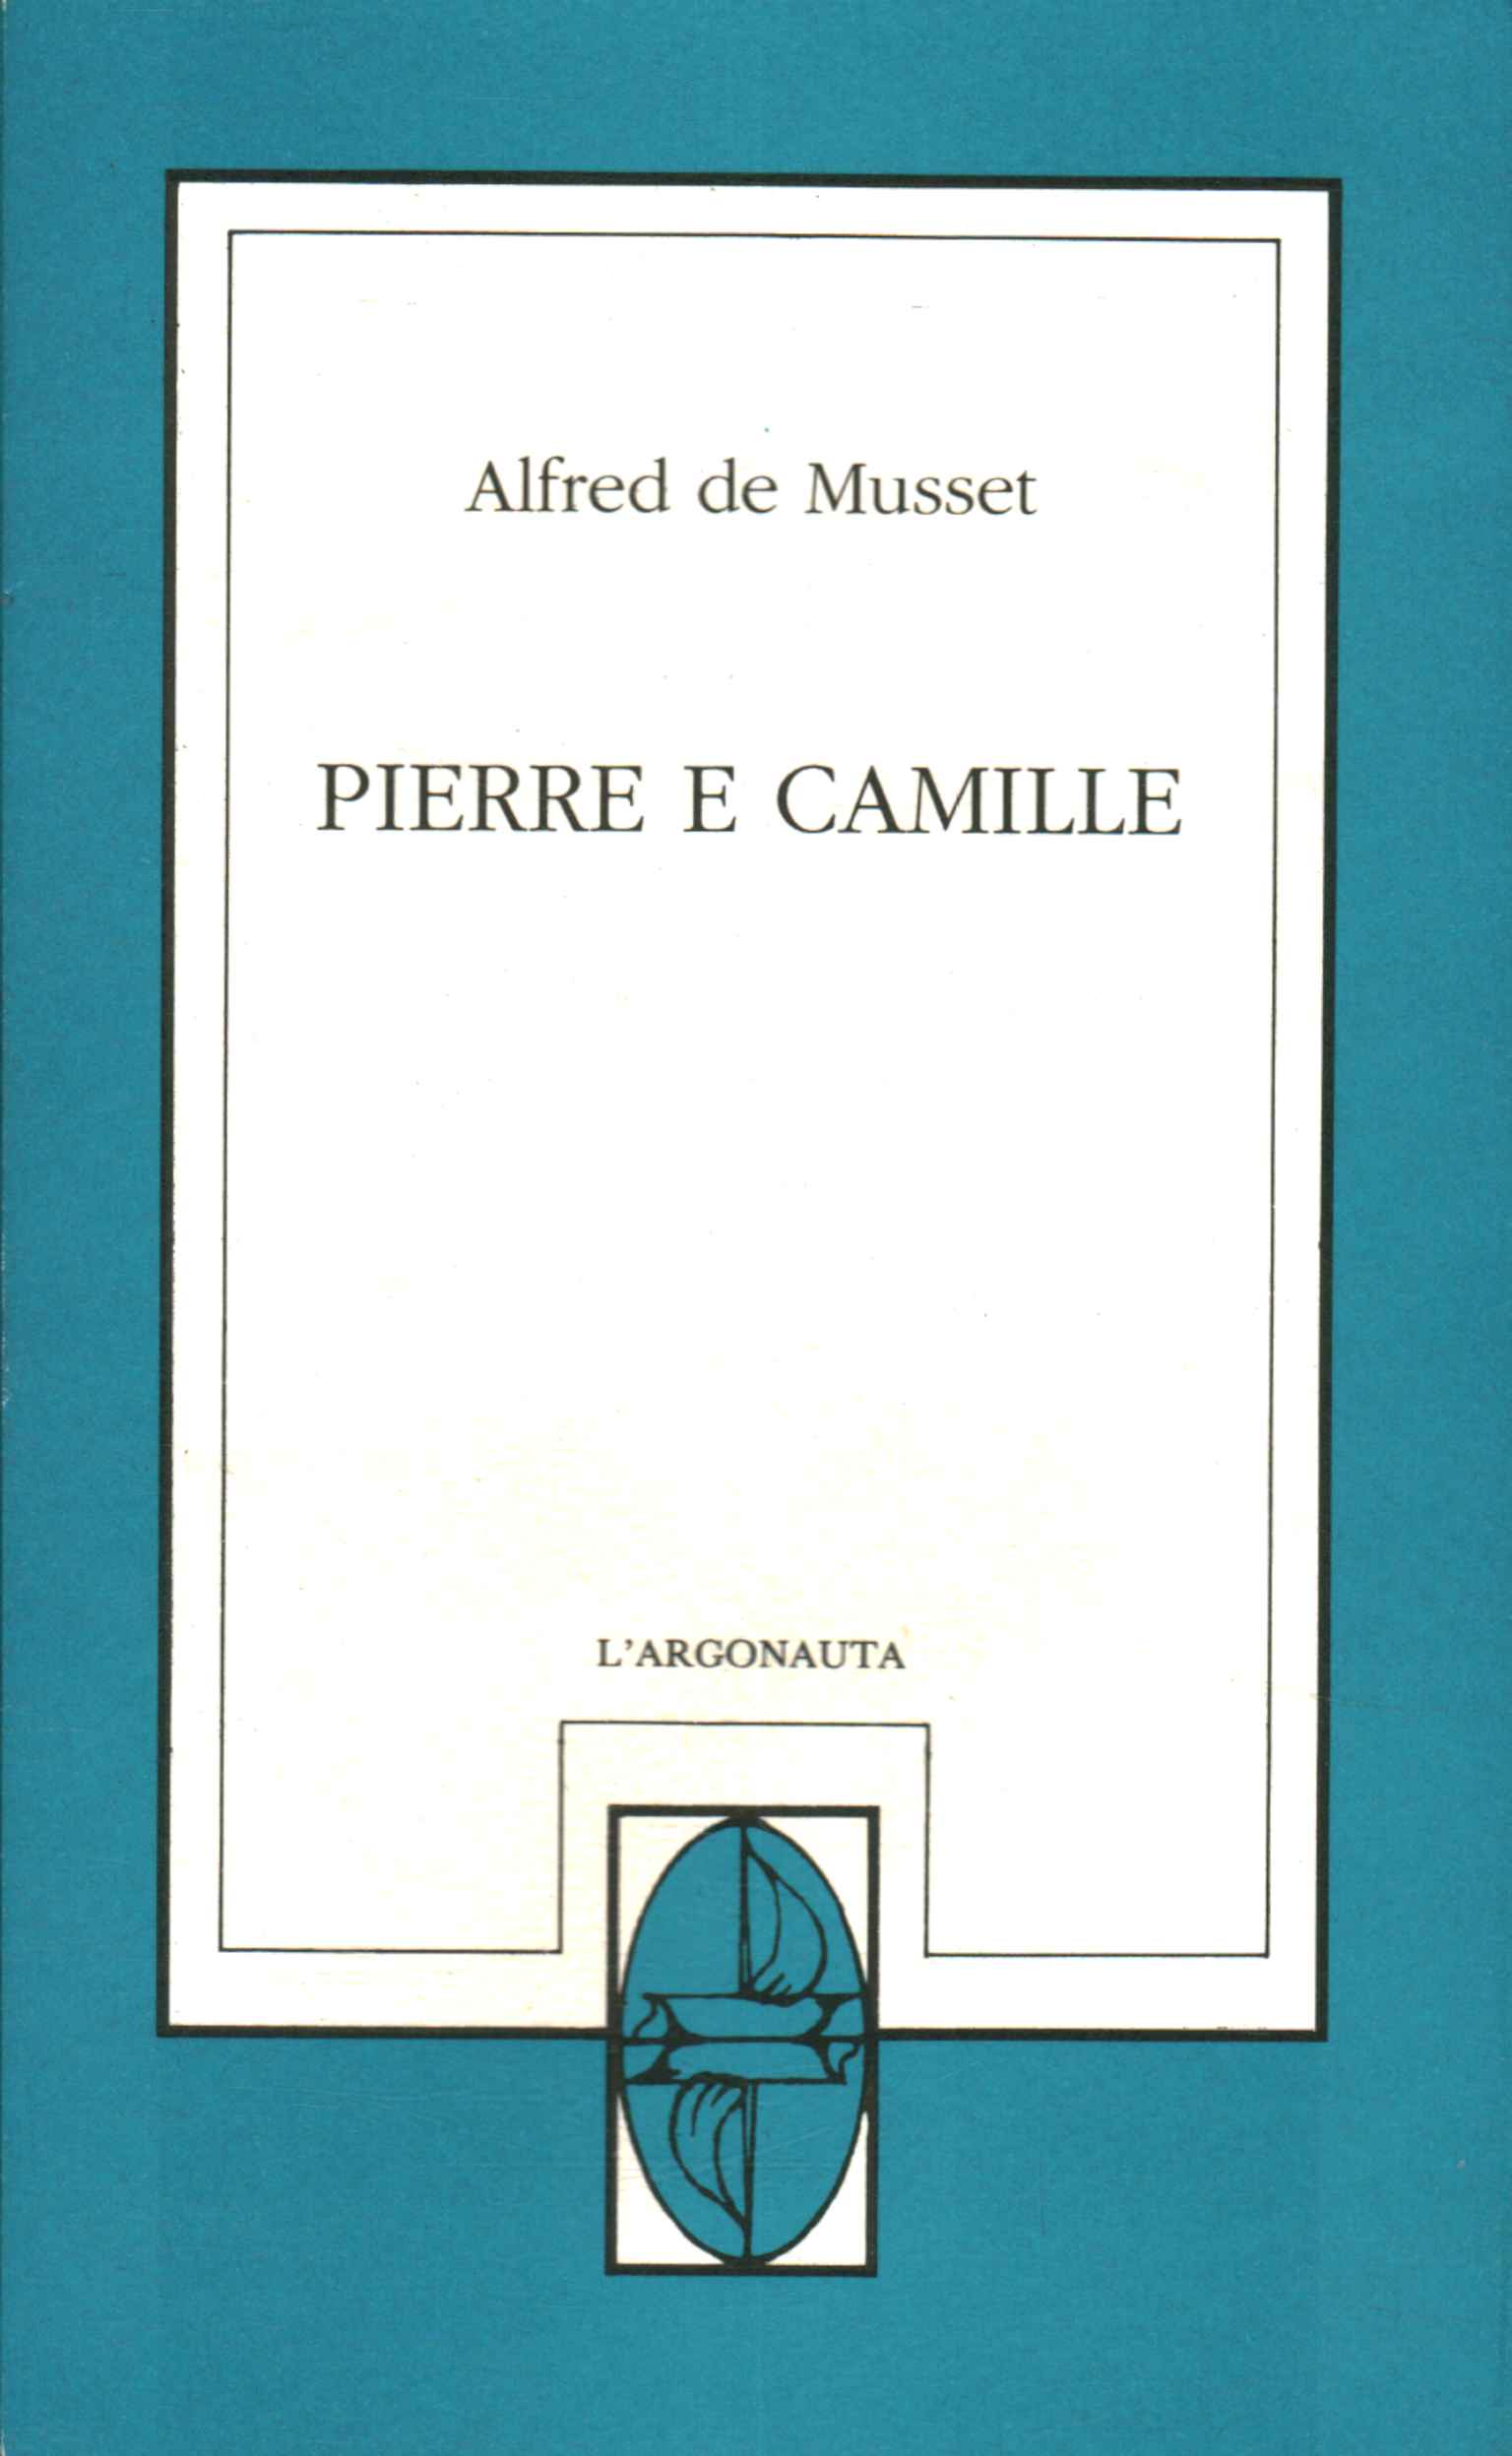 Pierre and Camille